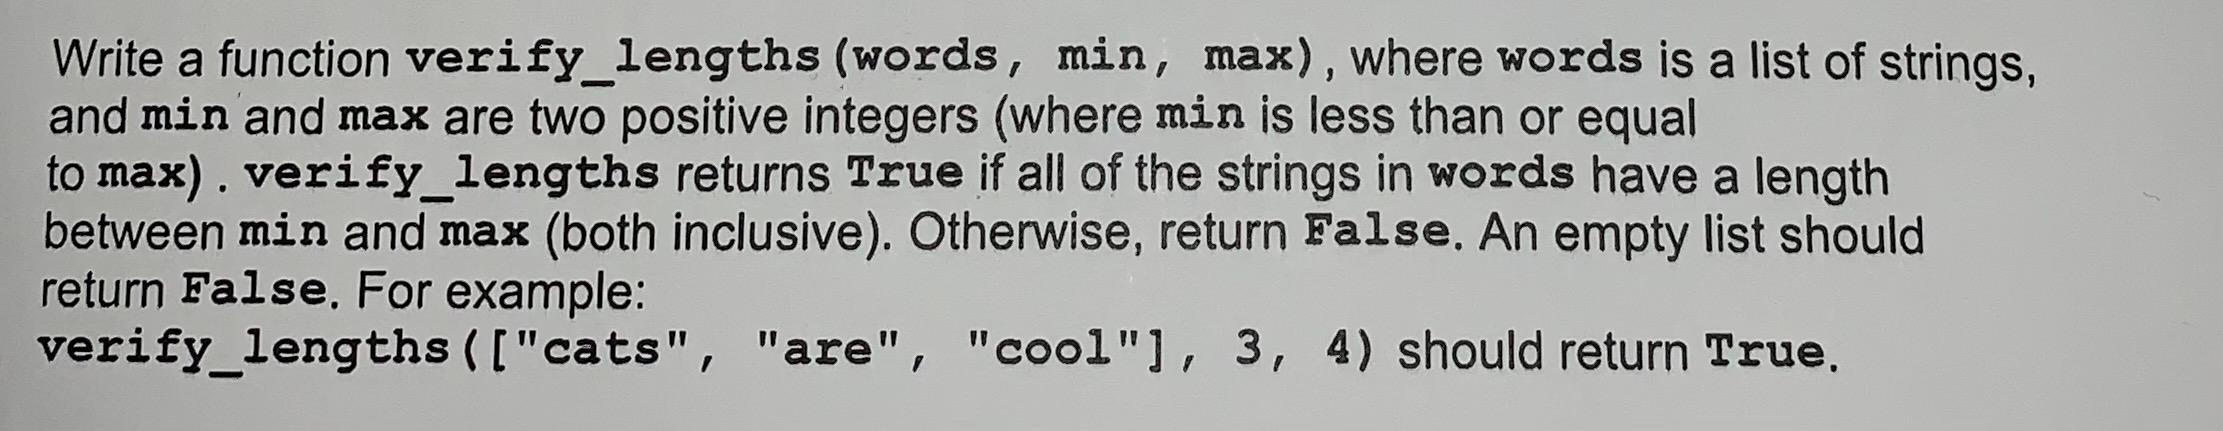 Write a function verify_lengths (words, min, max), where words is a list of strings, and min and max are two